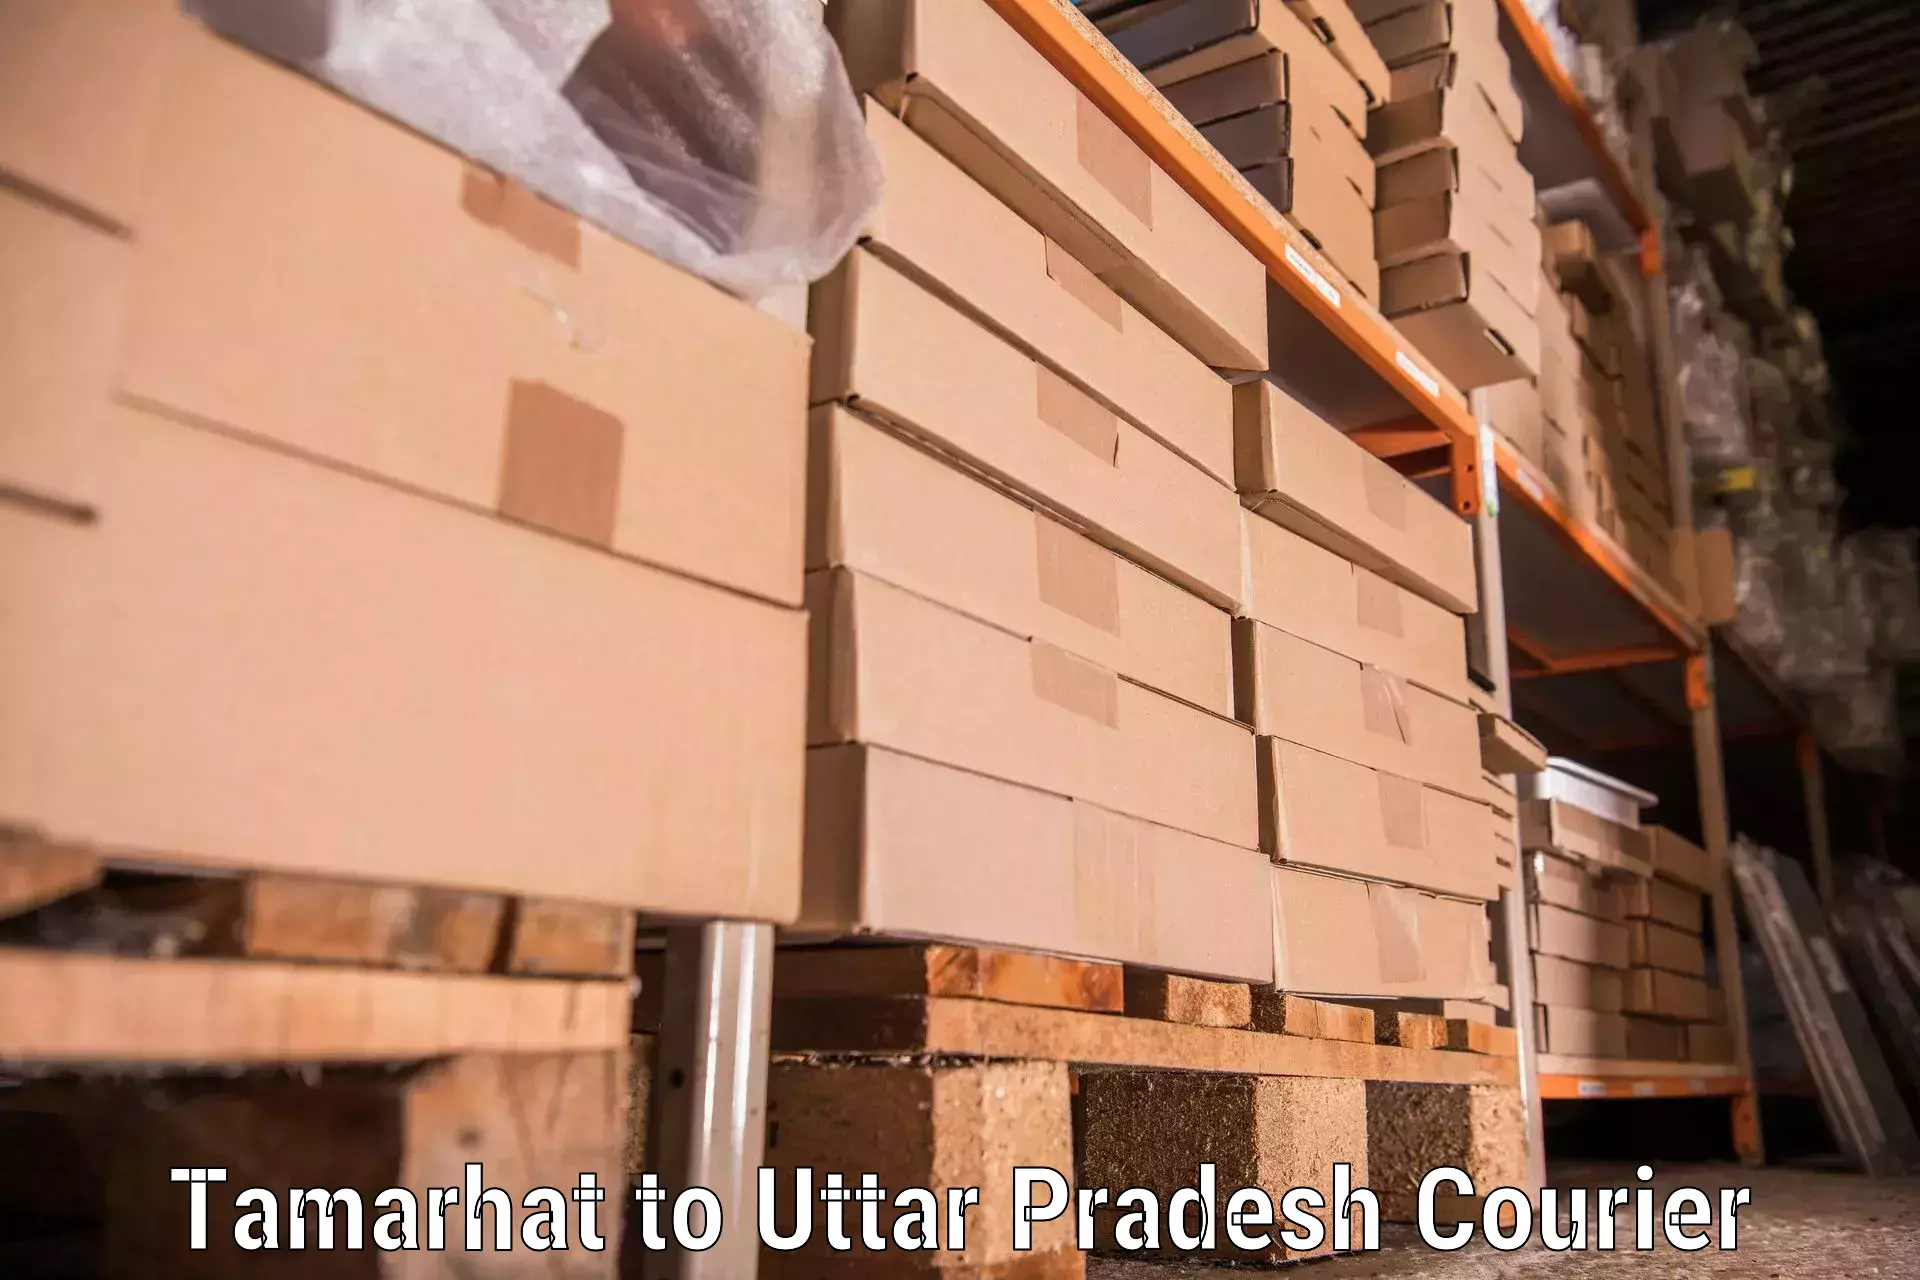 Trusted moving company Tamarhat to Vrindavan